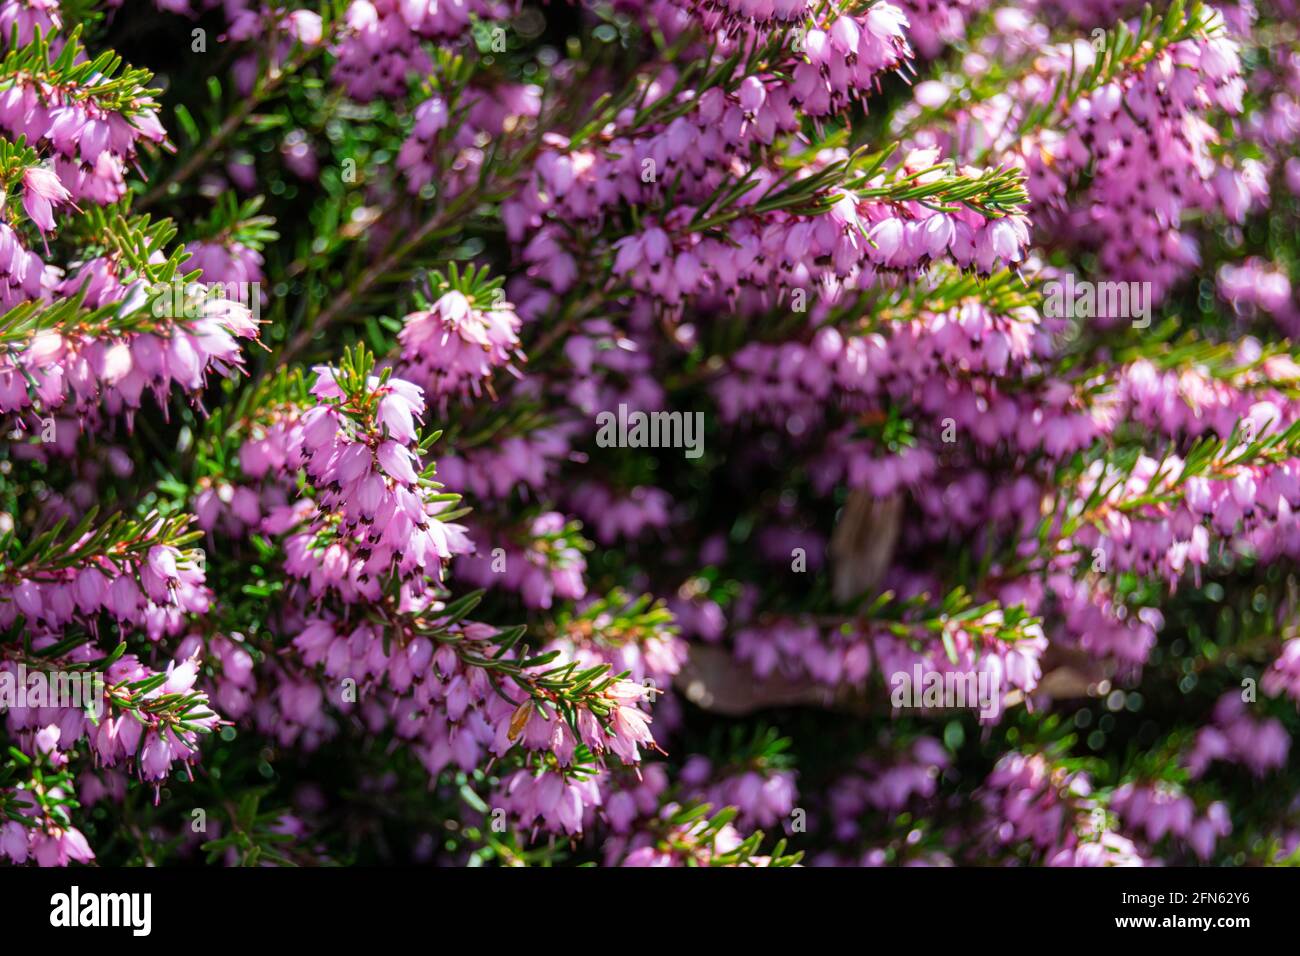 Closeup shot of pink Winter Heath flowers with green leaves Stock Photo